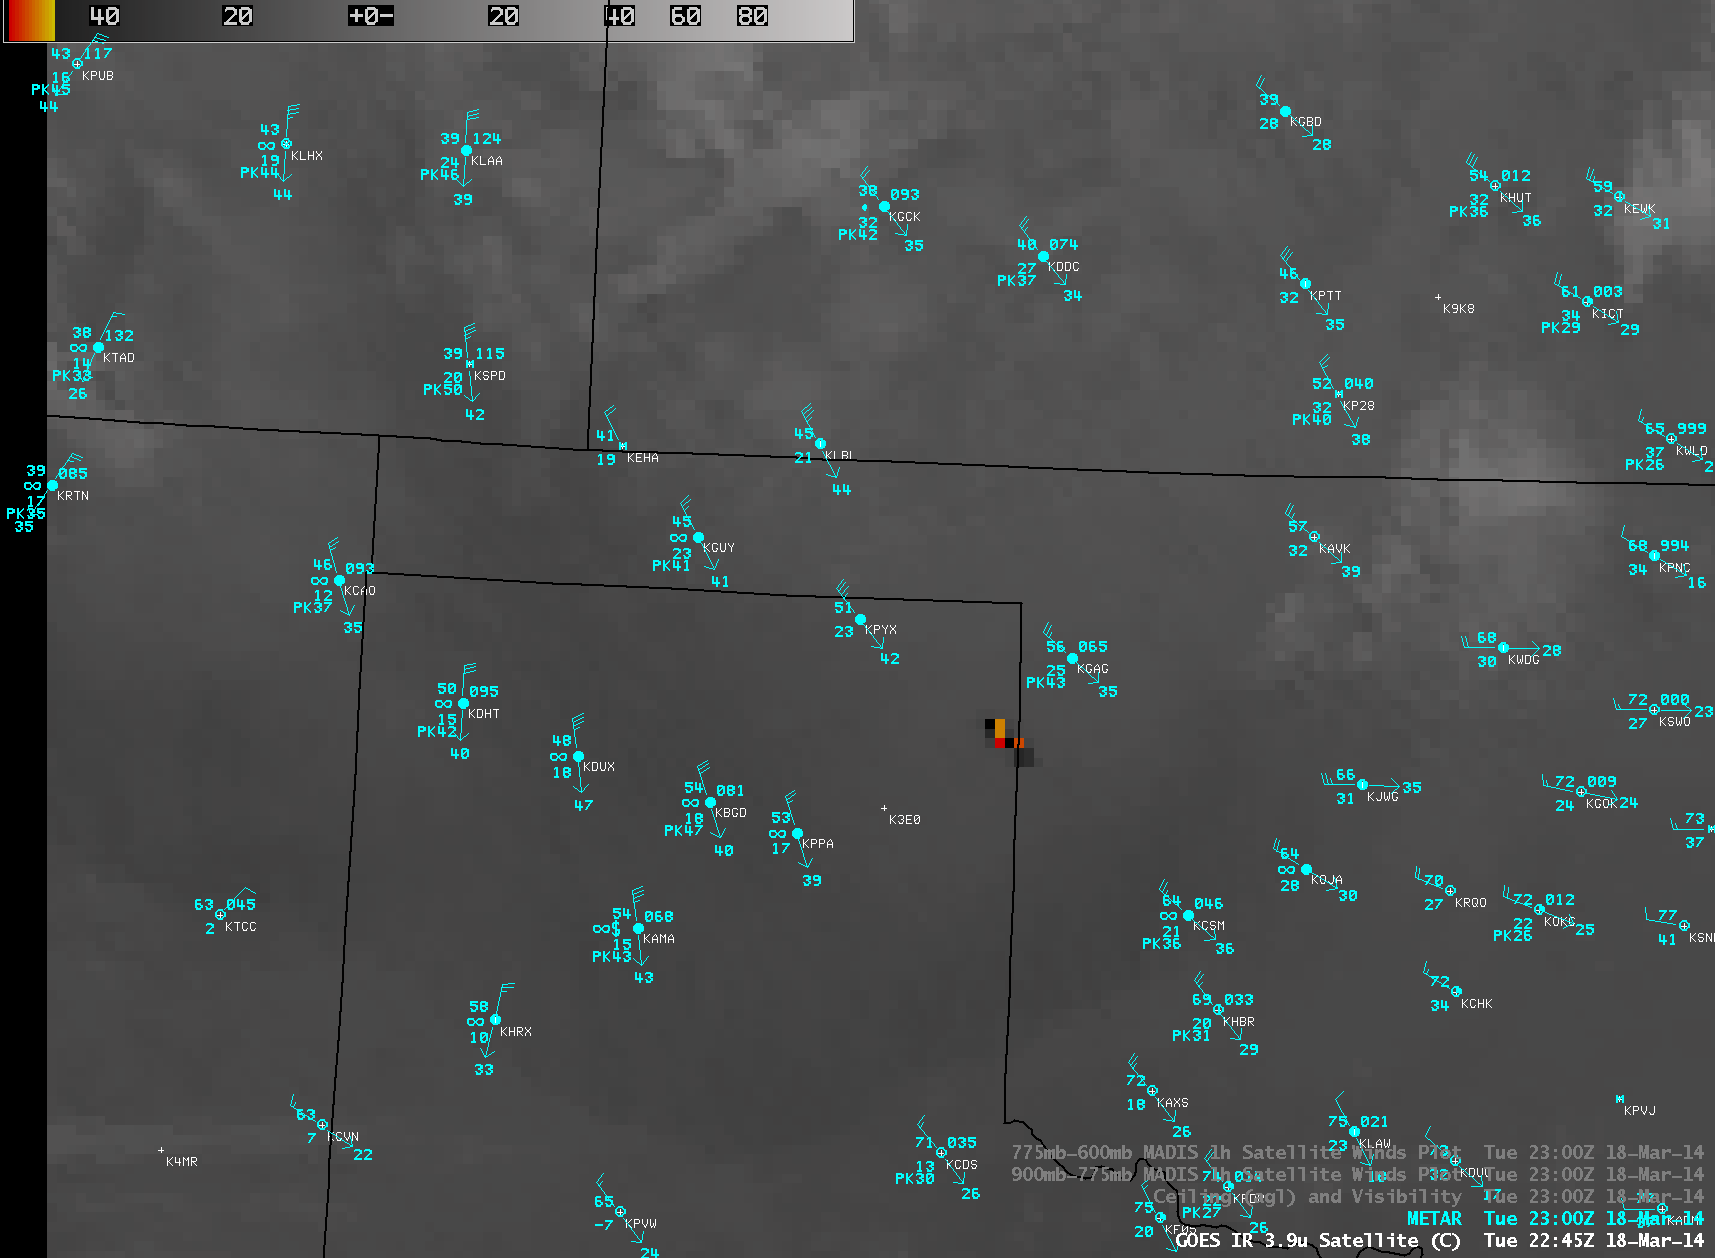 GOES-13 3.9 Âµm shortwave IR images with METAR surface reports (click to play animation)